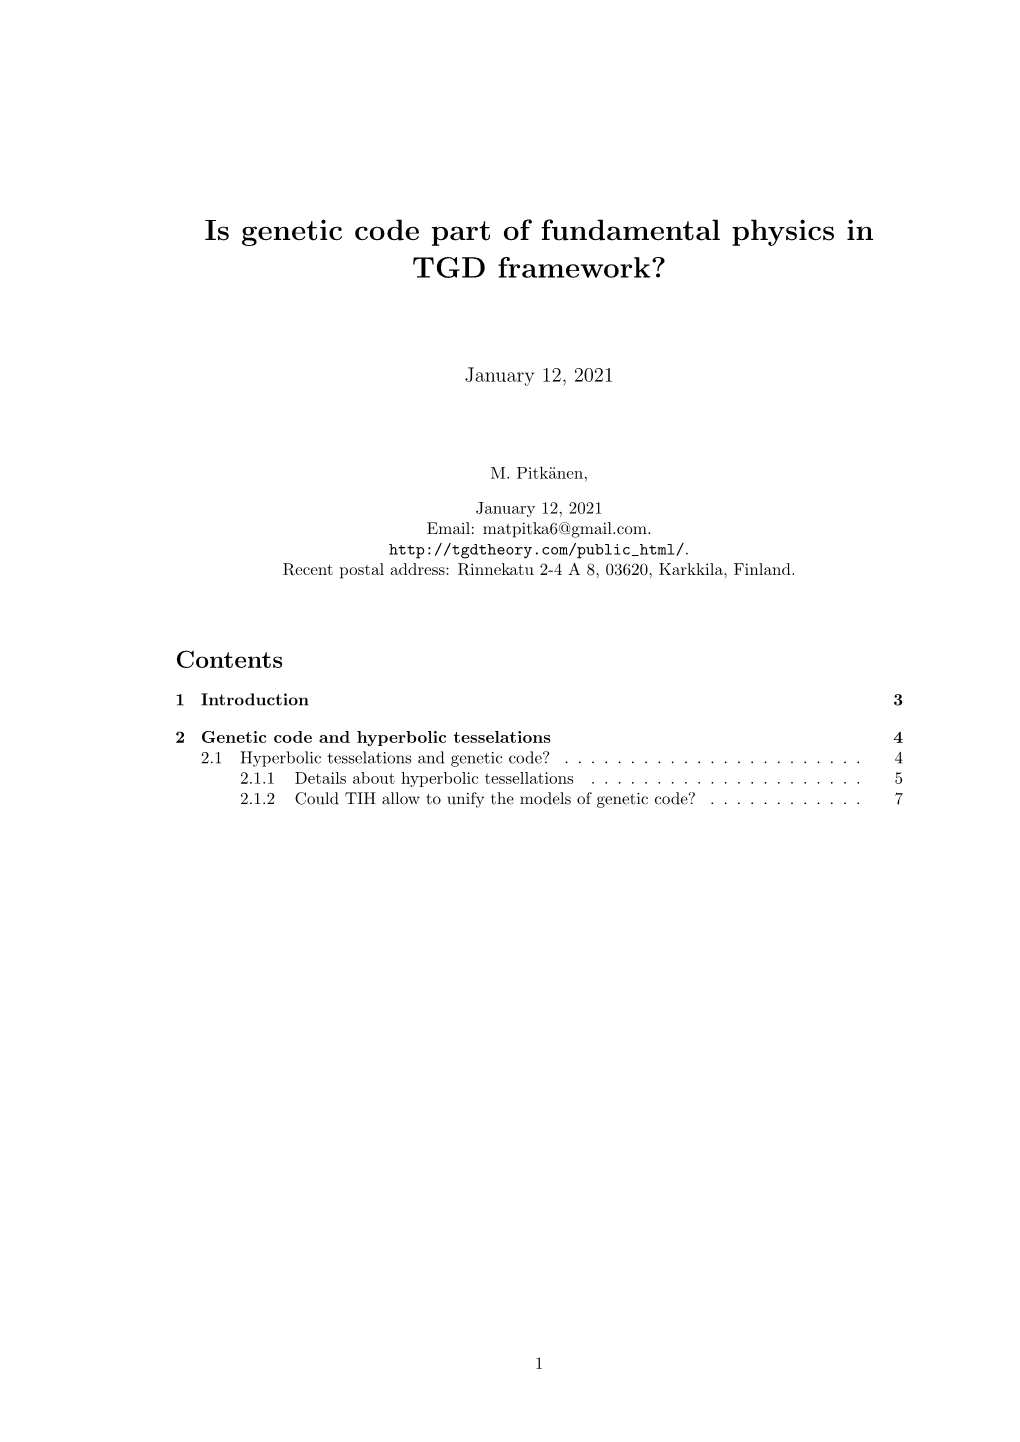 Is Genetic Code Part of Fundamental Physics in TGD Framework?